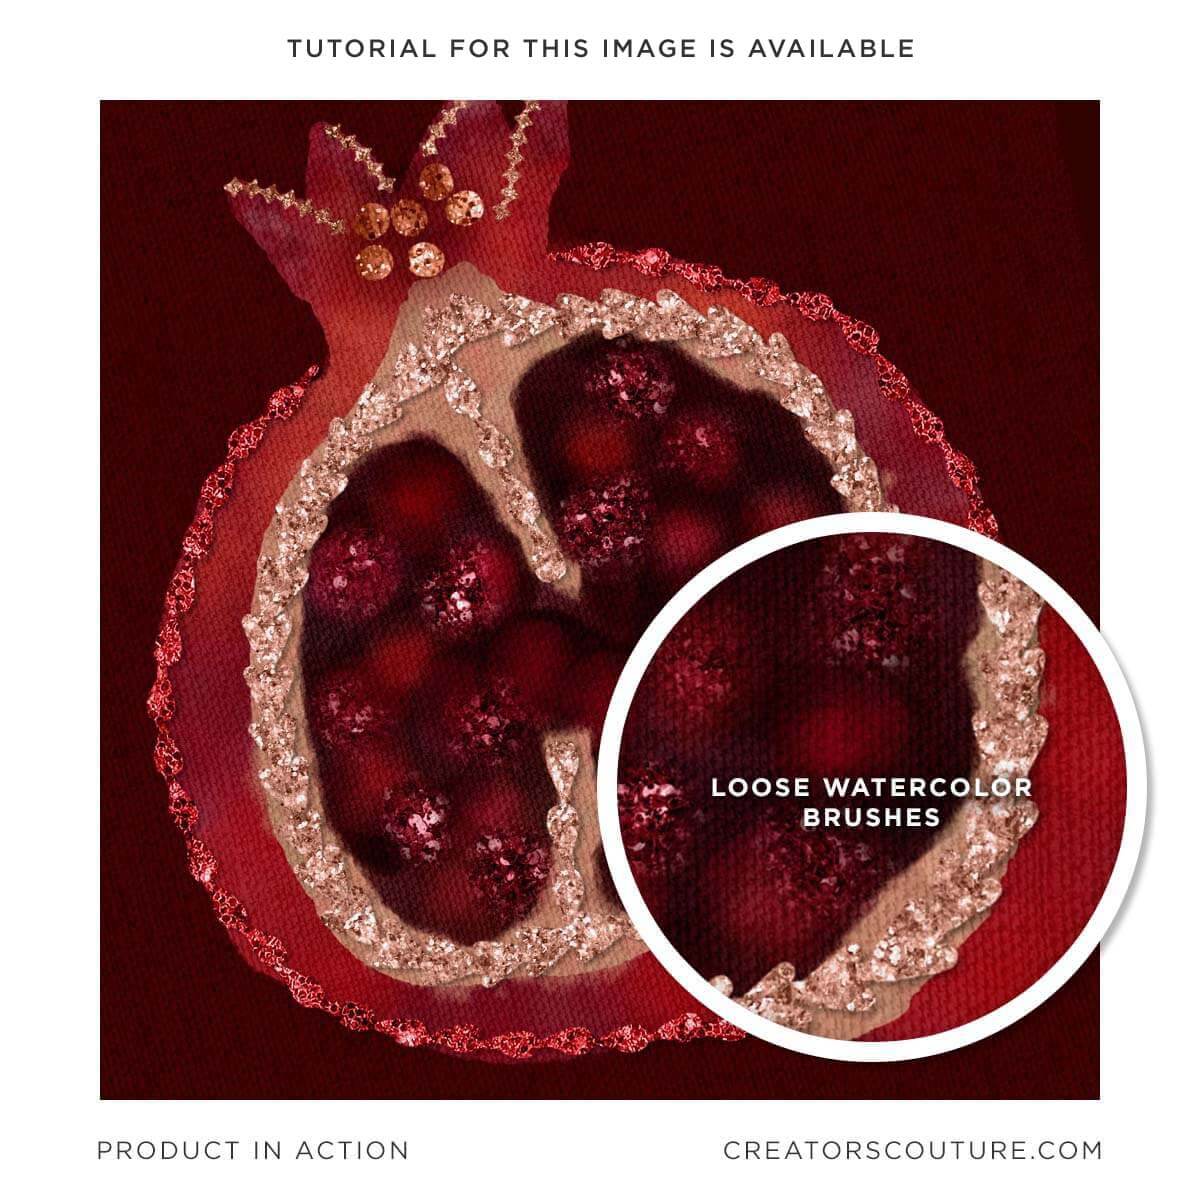 Pomegranate illustration with jeweled accent, in Photoshop using loose watercolor, Photoshop brushes 